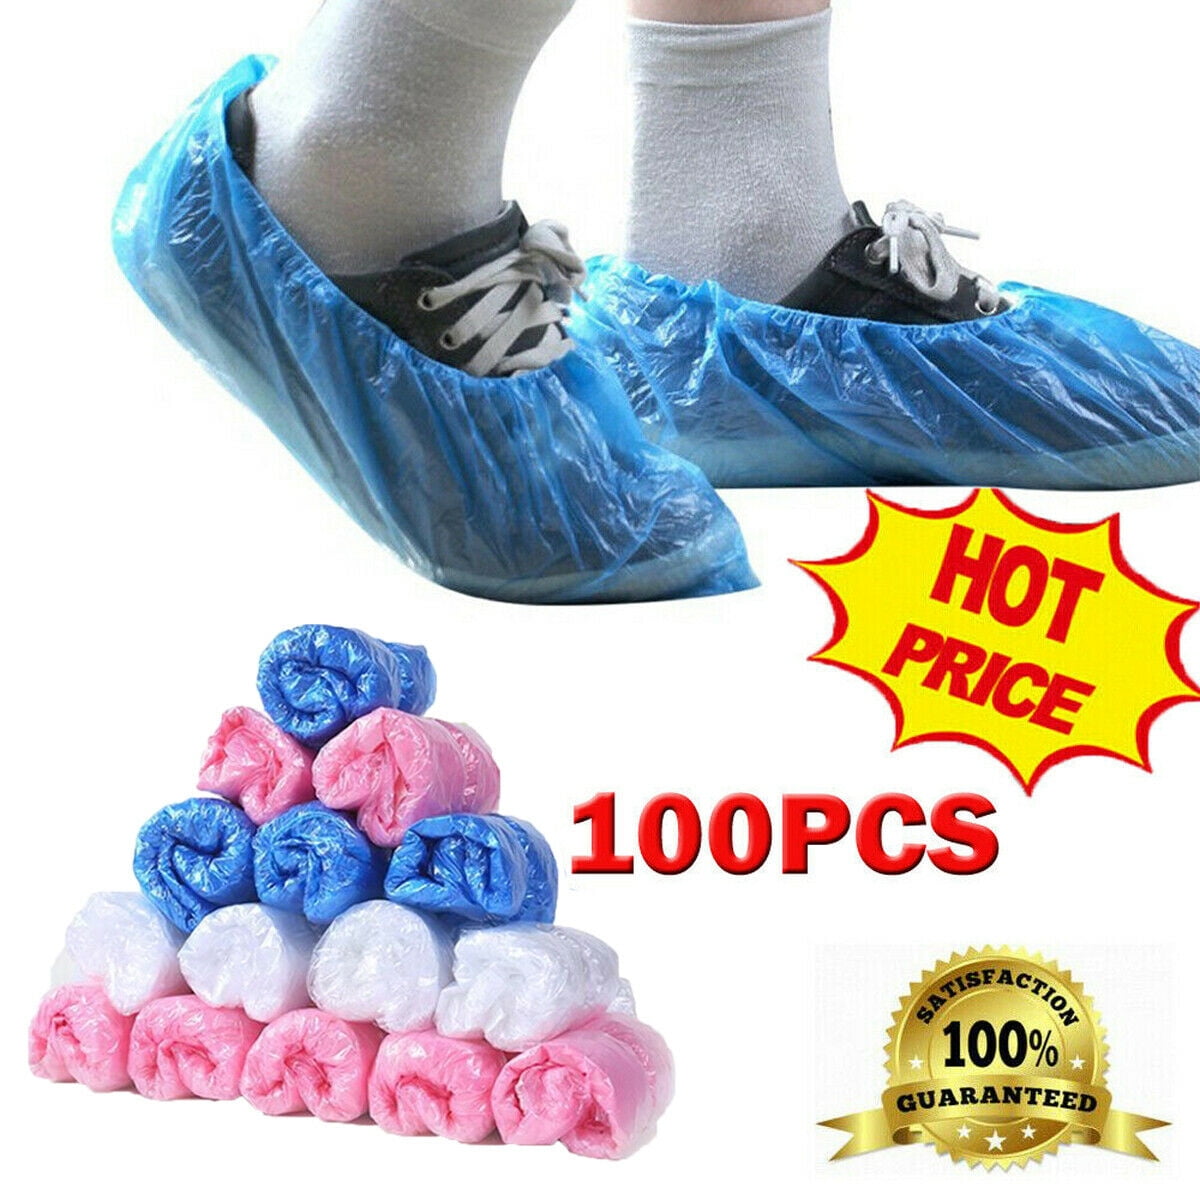 100-500Pcs Waterproof Boot Covers Plastic Disposable Shoe Cover Overshoe ZP 